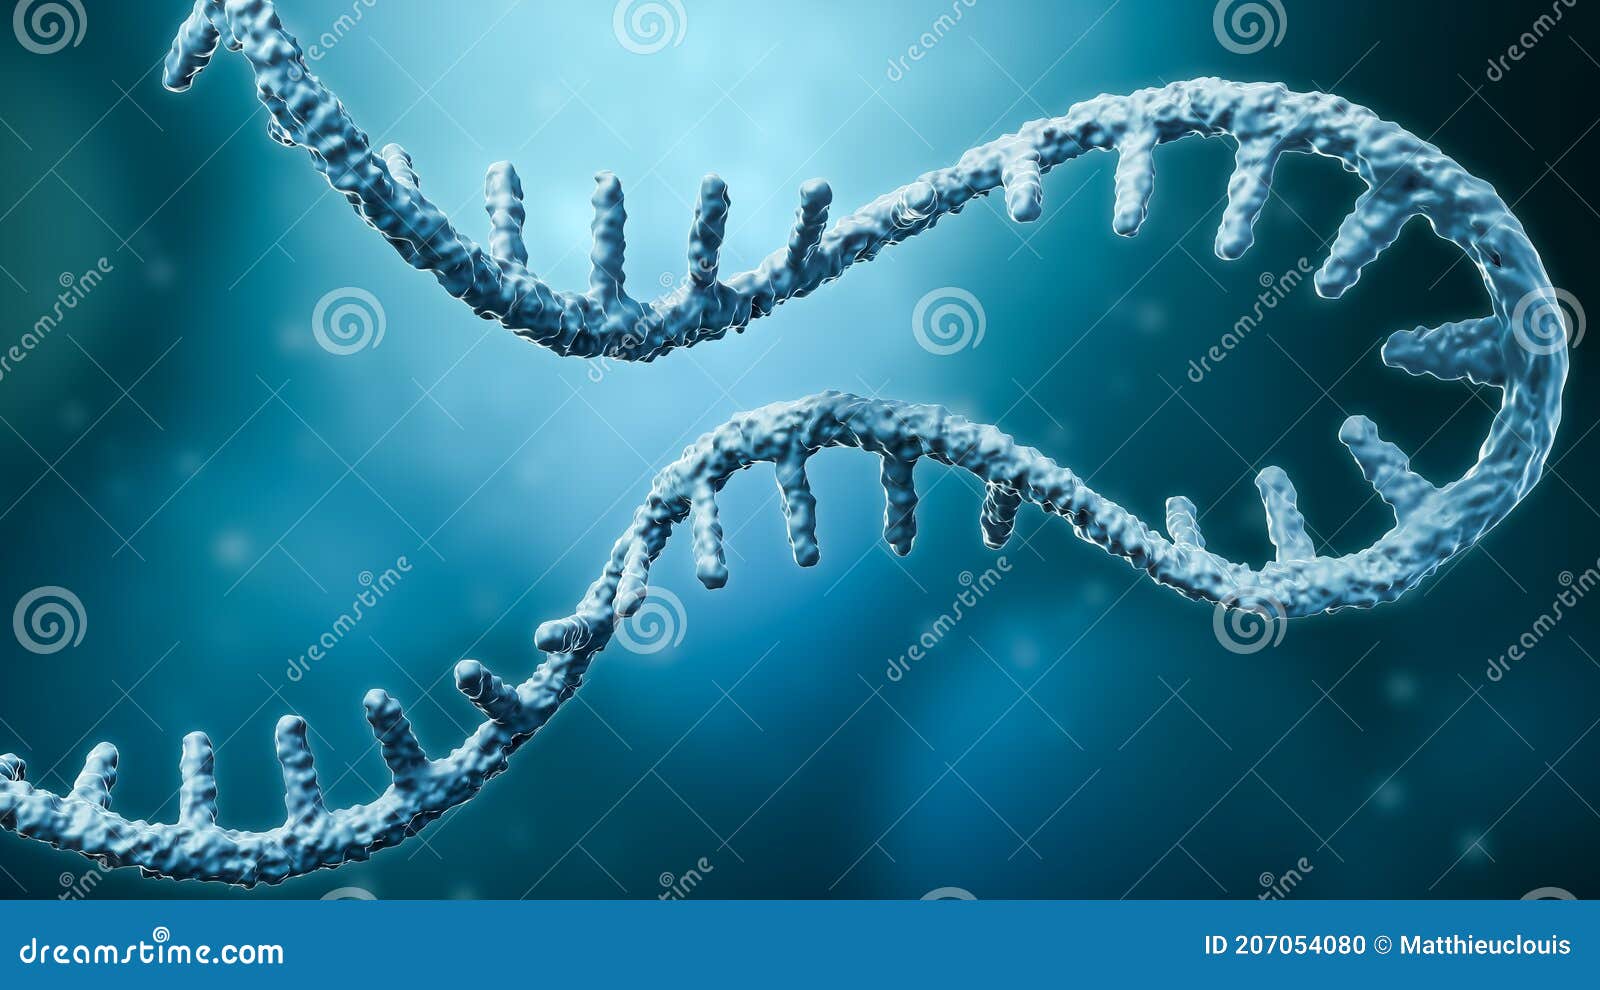 messenger rna or mrna strand 3d rendering  with copy space. genetics, science, medical research, genome replication